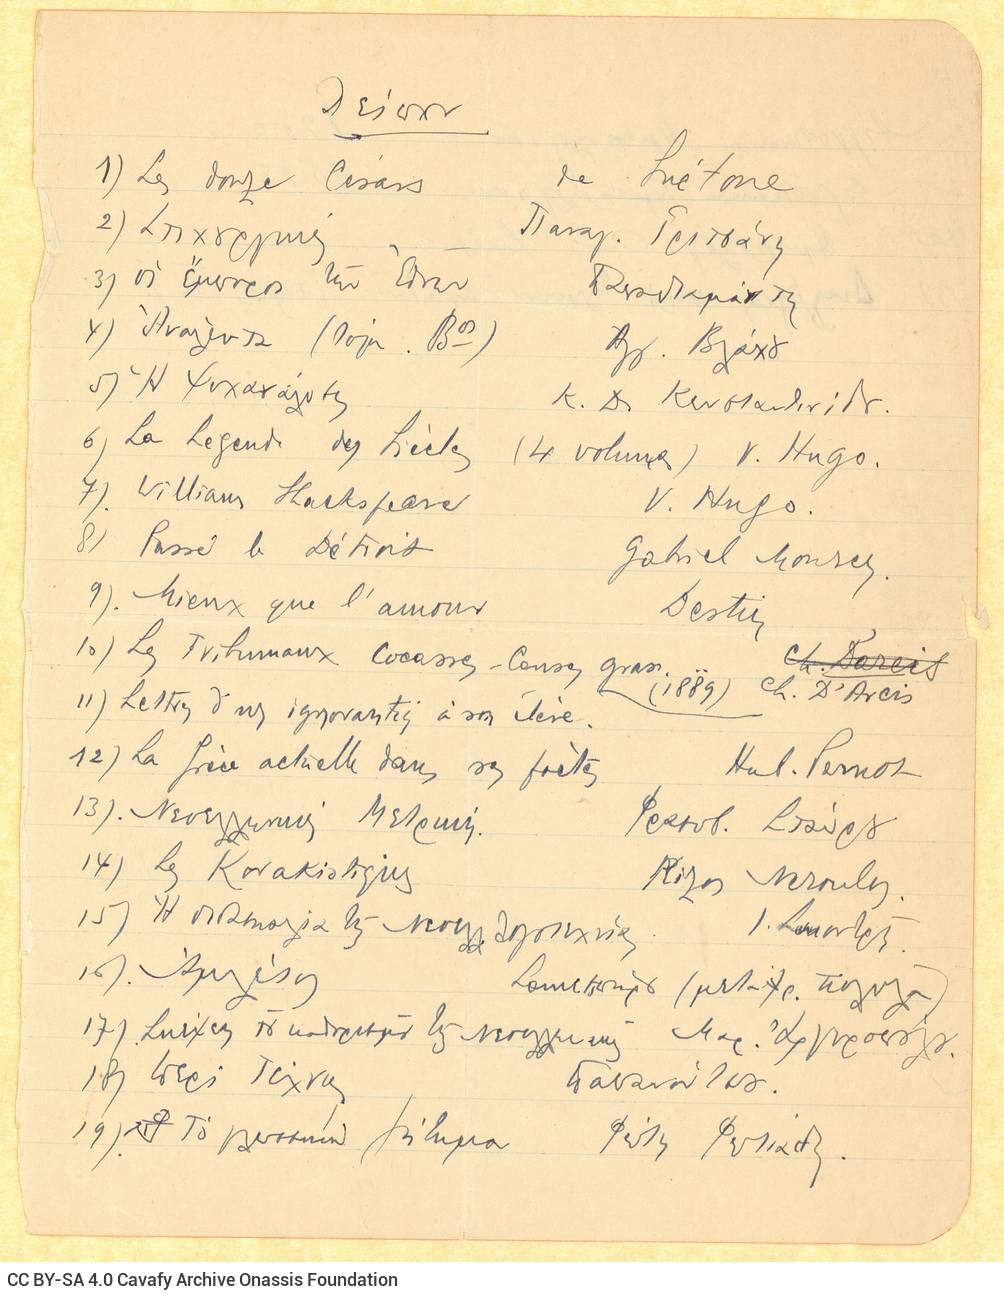 Handwritten notes by G. A. Papoutsakis on both sides of a ruled sheet. Twenty-three titles of books and their authors are rec